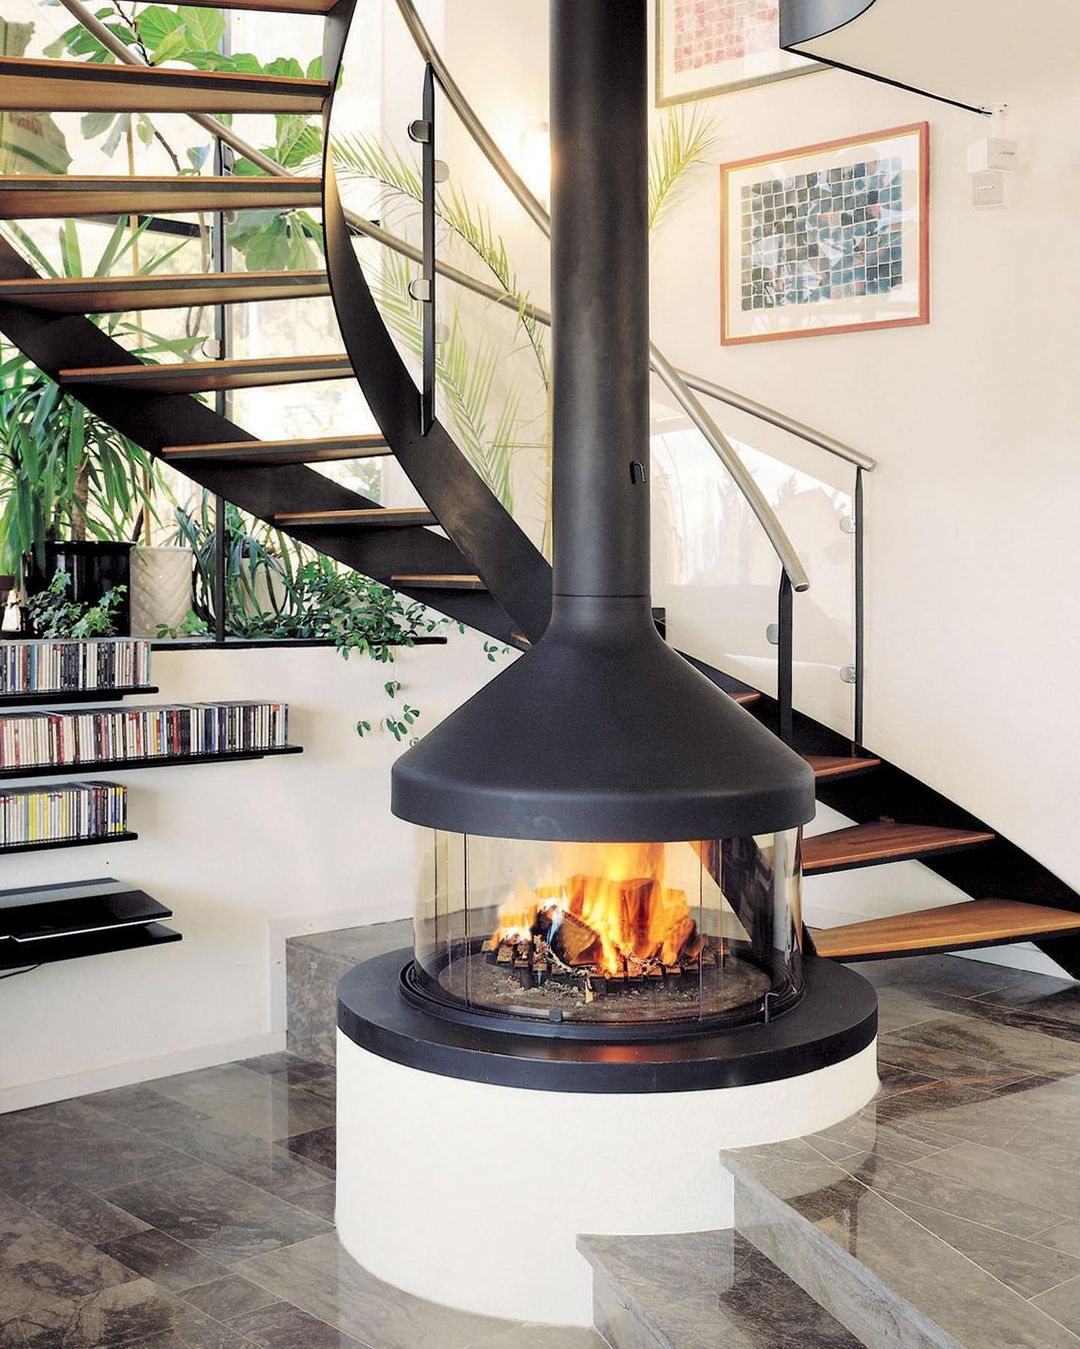 Modern Home with Spiral Staircase and Fireplace. Photo by Instagram user @heartlyhome